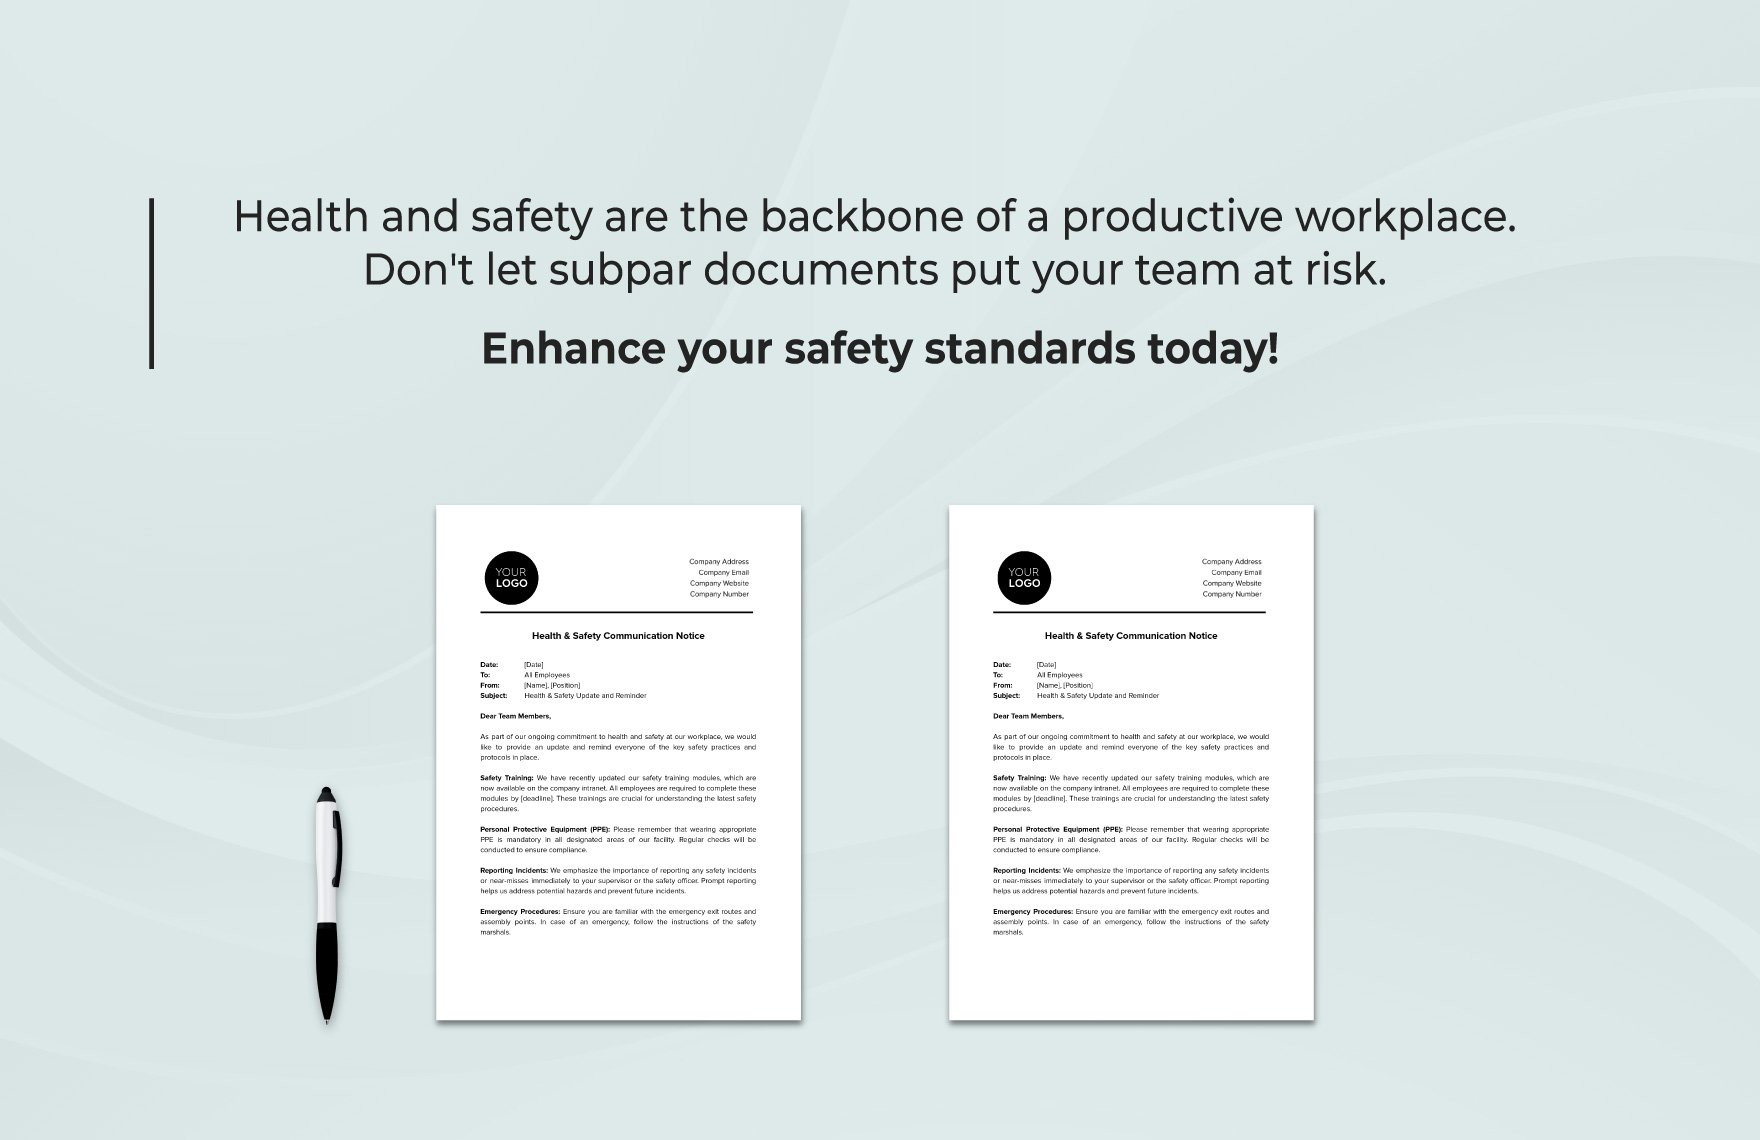 Health & Safety Communication Notice Template